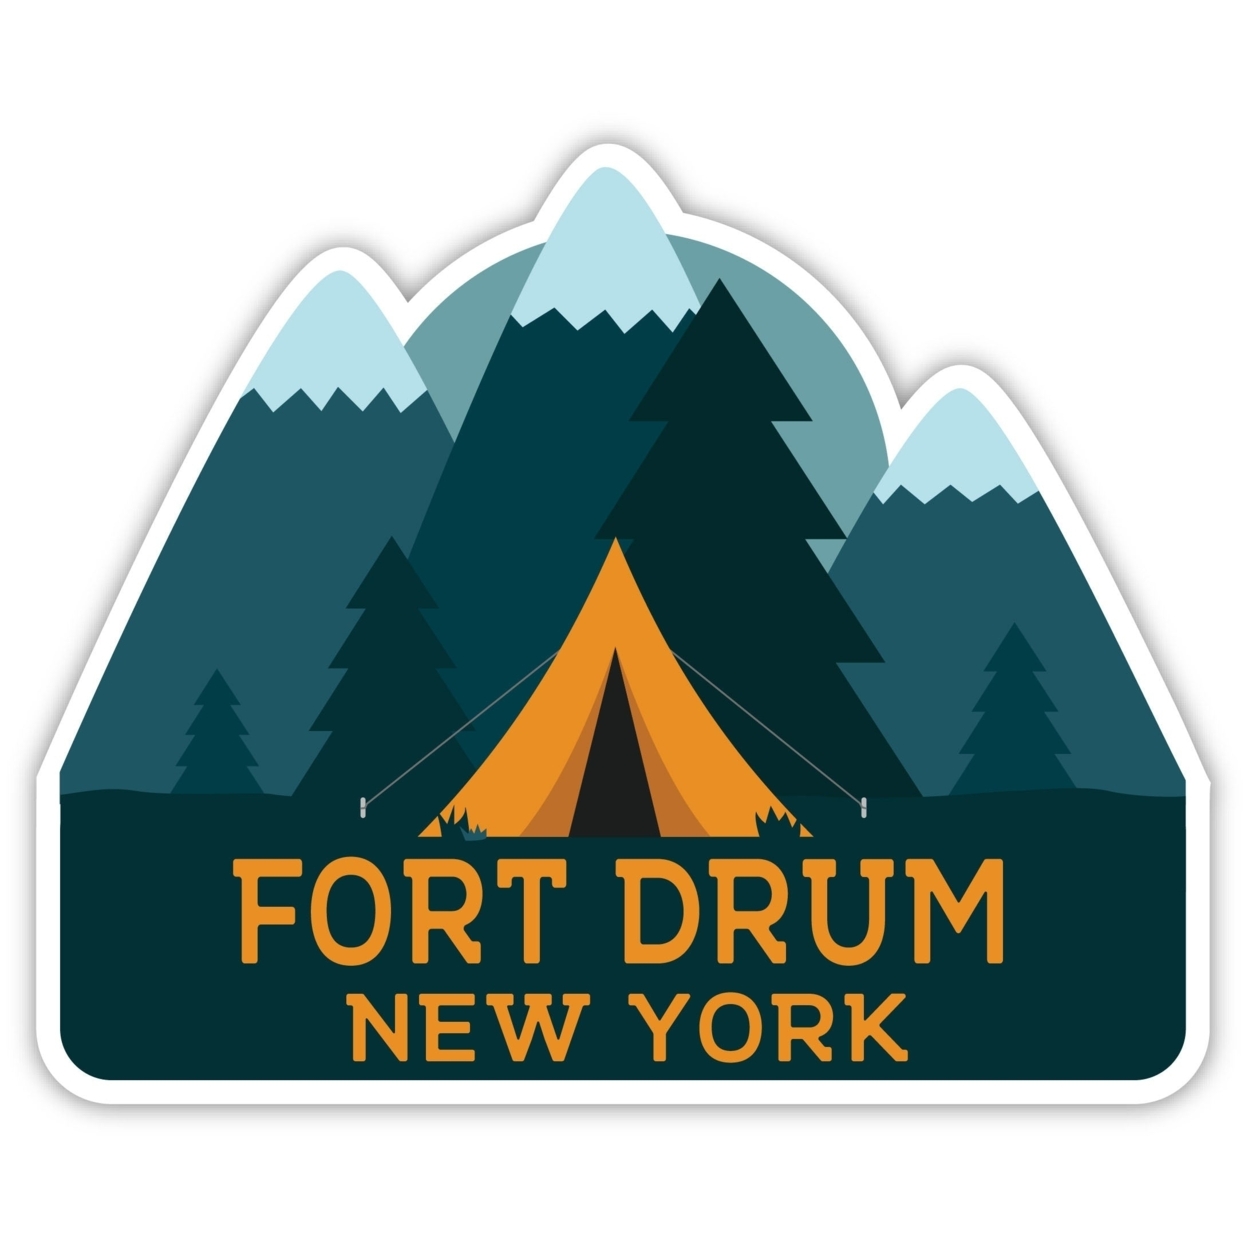 Fort Drum New York Souvenir Decorative Stickers (Choose Theme And Size) - 4-Pack, 4-Inch, Bear